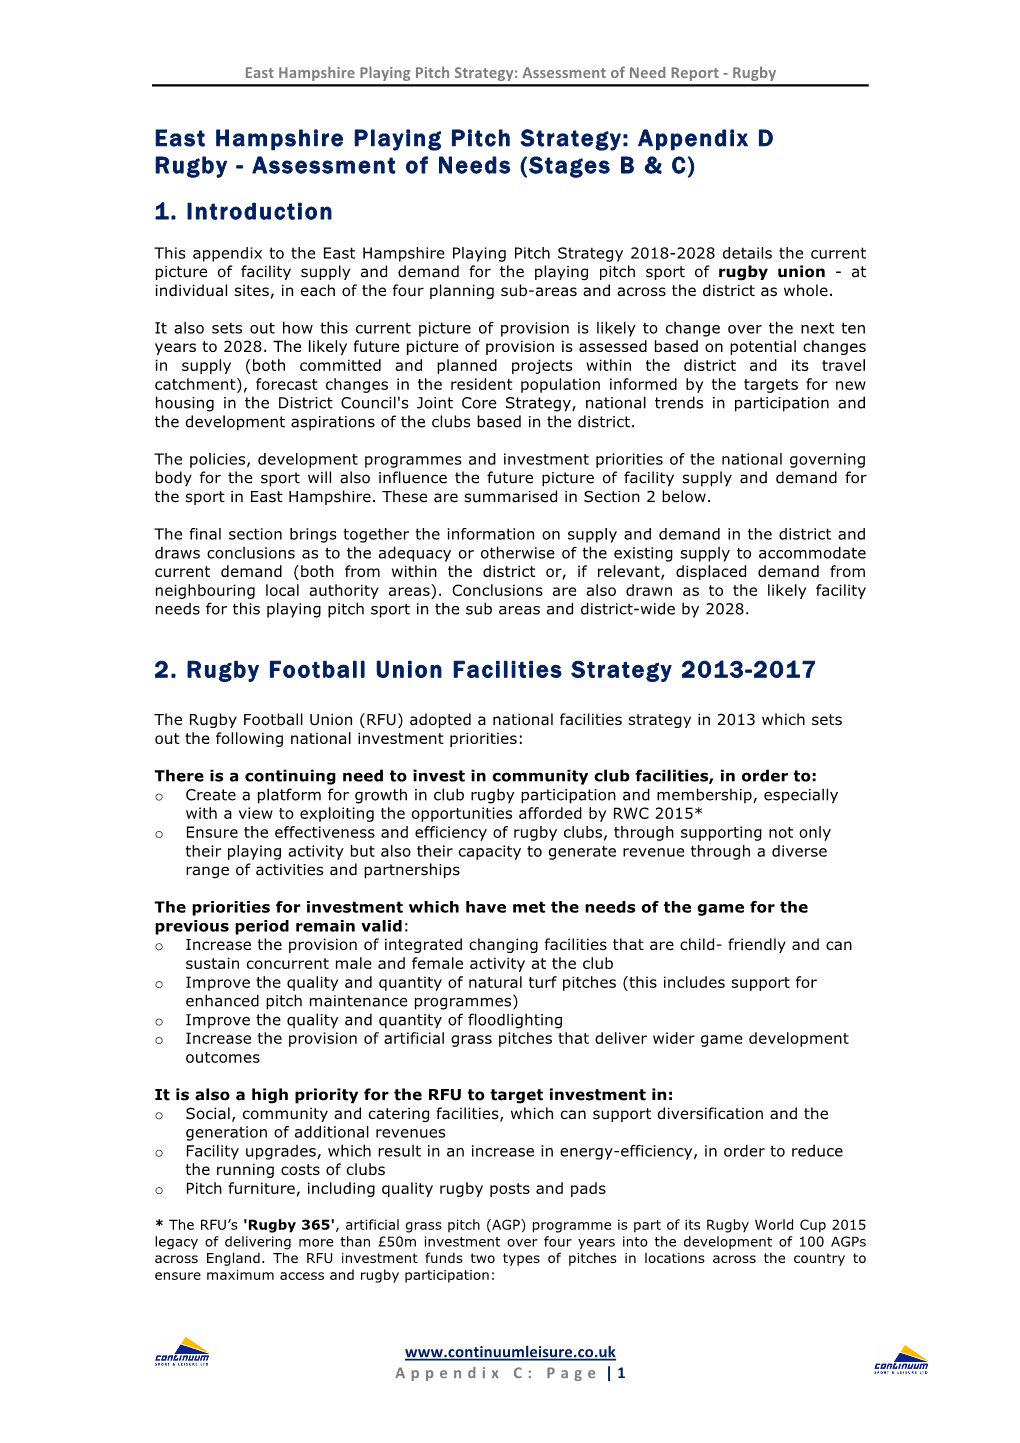 East Hampshire Playing Pitch Strategy: Appendix D Rugby - Assessment of Needs (Stages B & C)